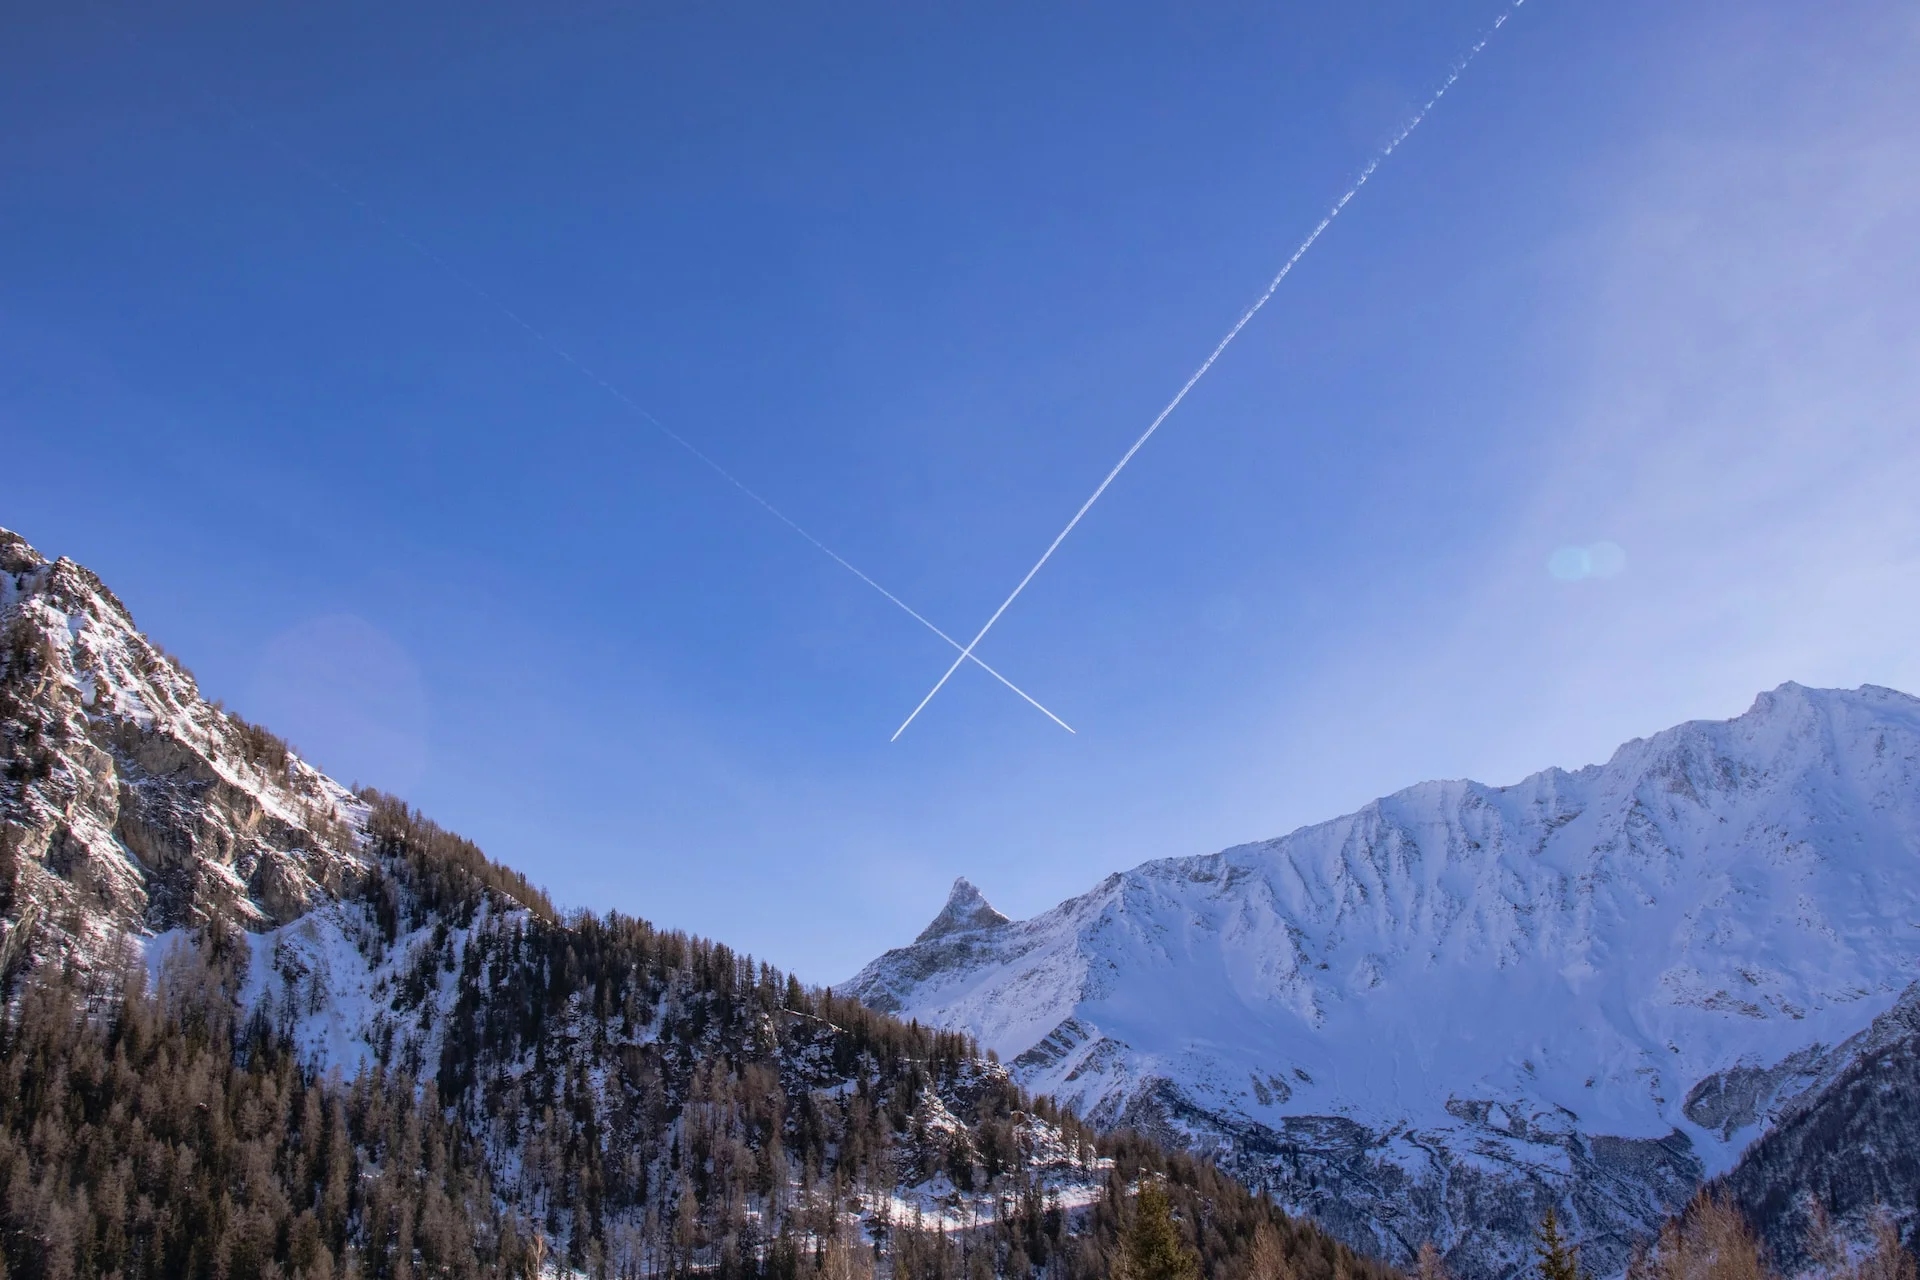 a plane is flying over a snowy mountain range